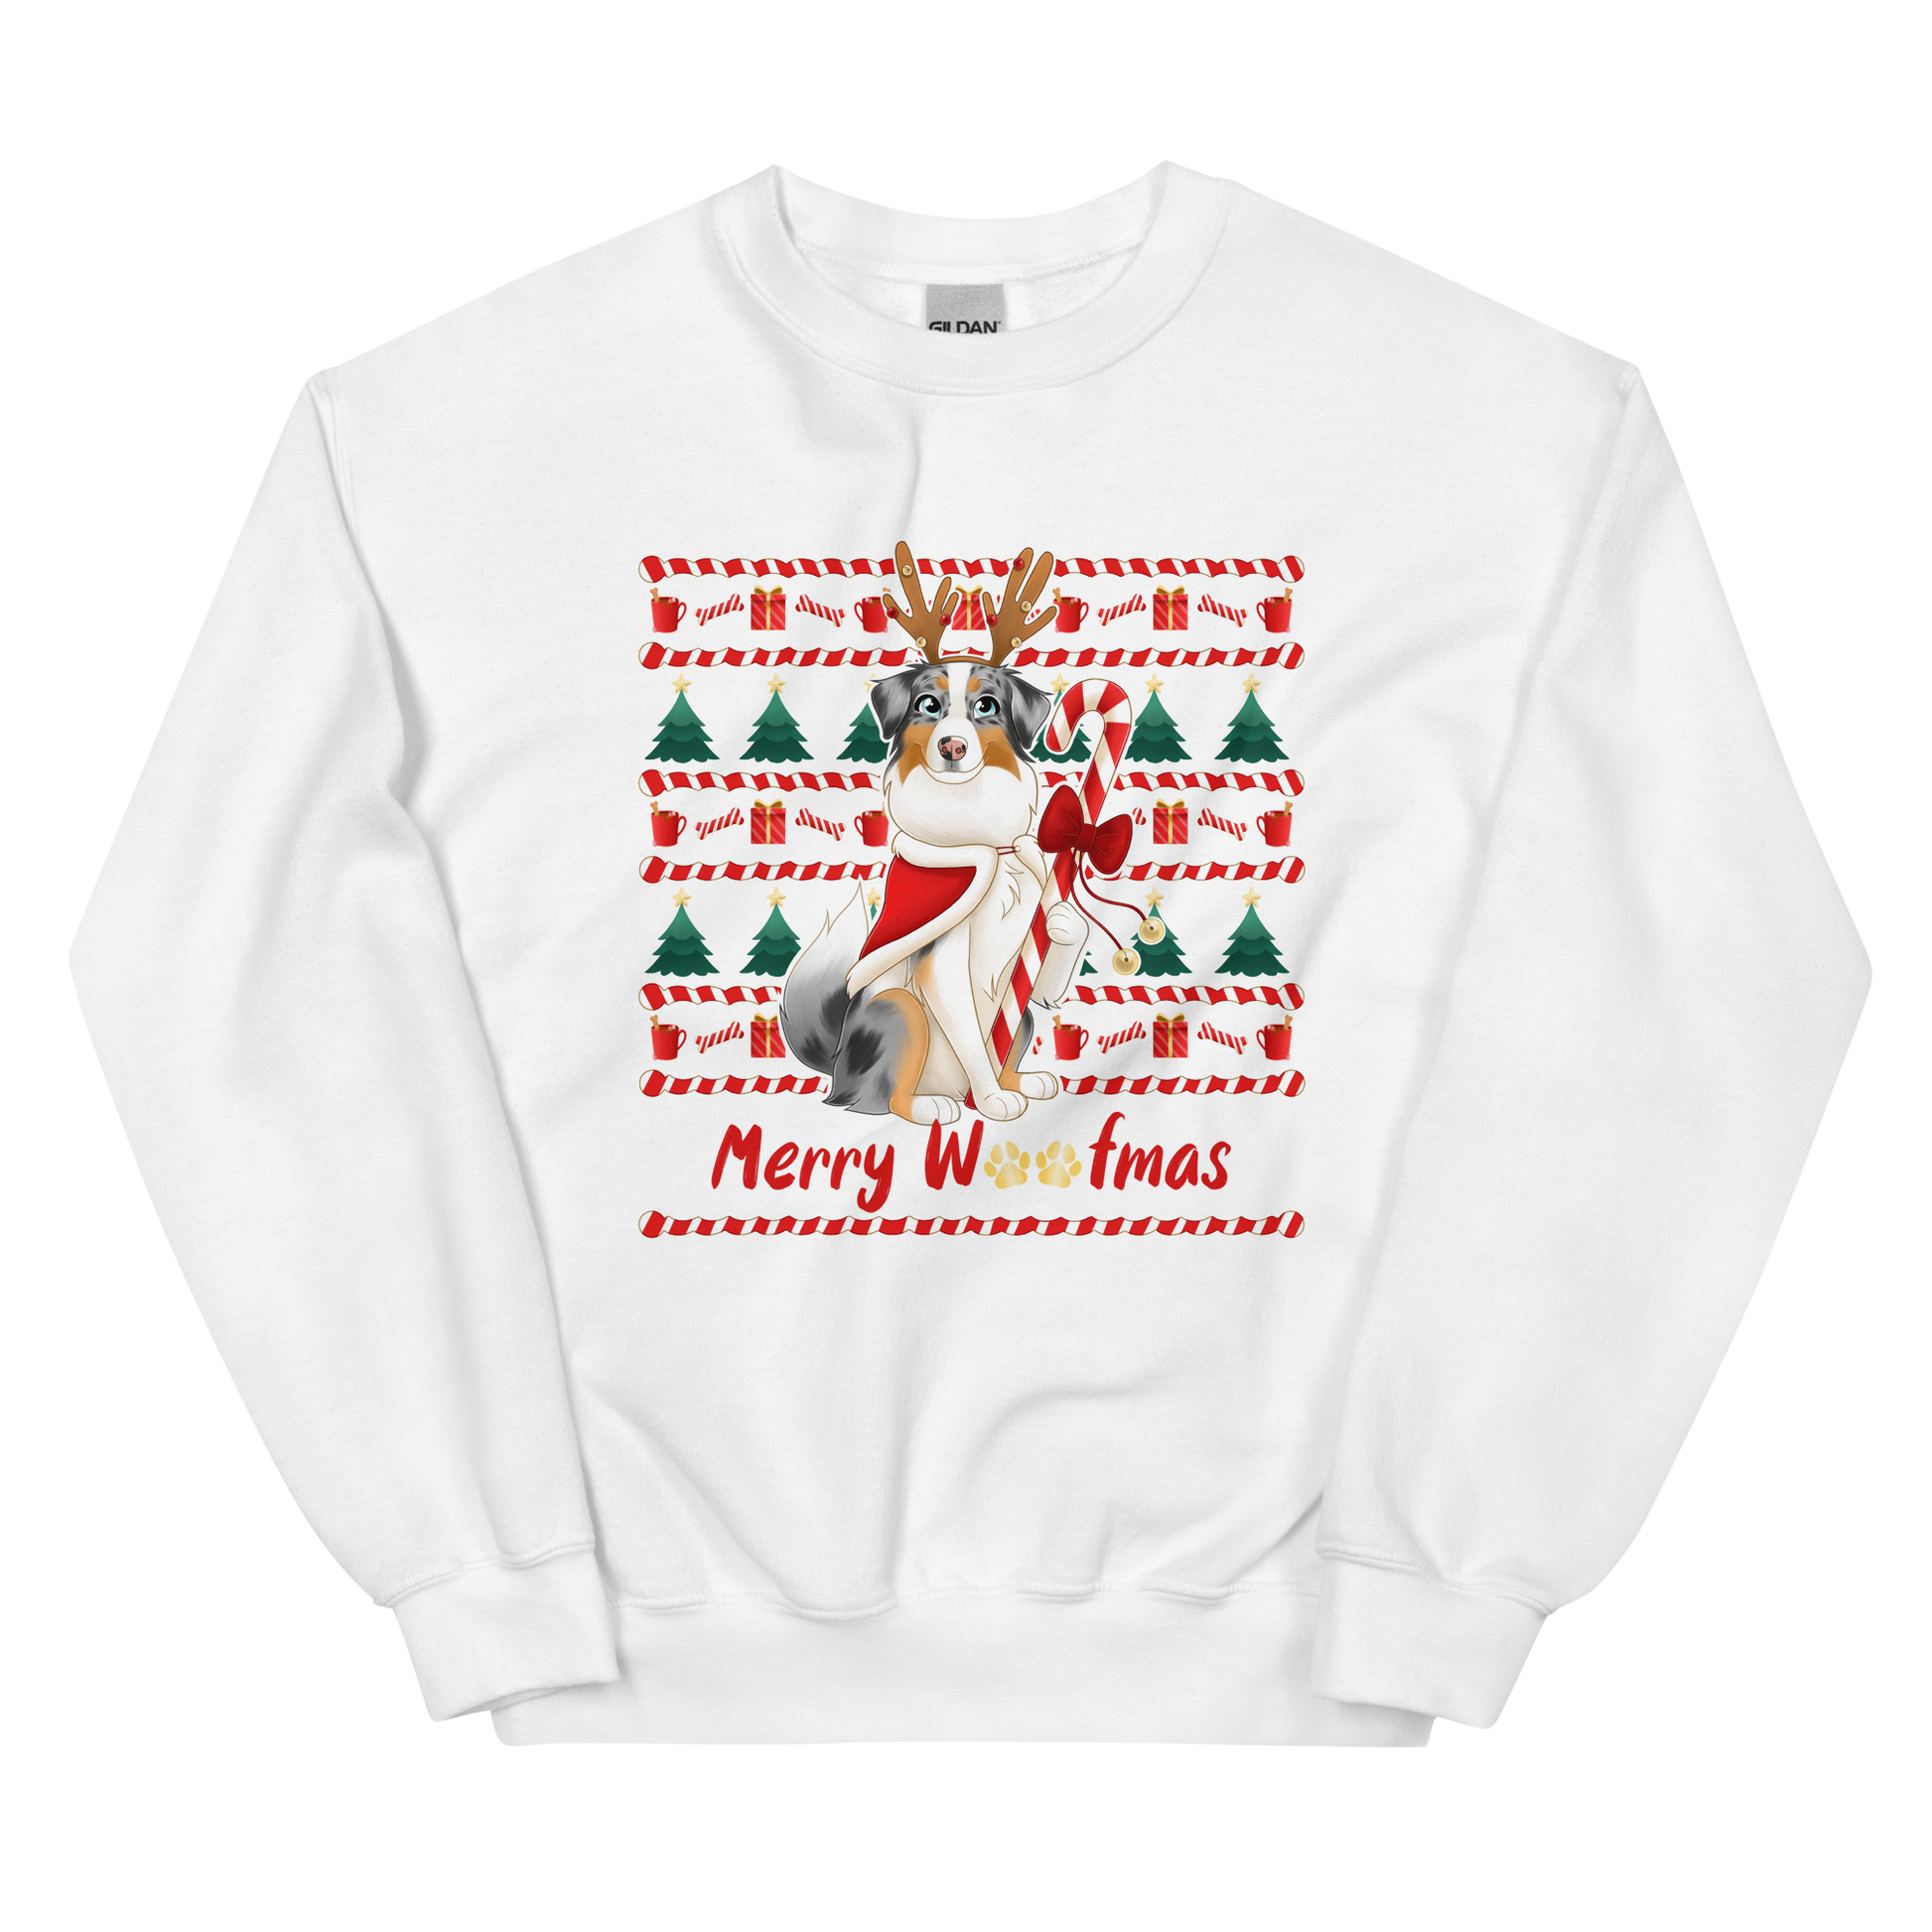 Do you love Christmas as much as you love your Australian Shepherd? Then look no further! You will love this adorable Ugly Christmas Sweater featuring our latest Aussie Mom design. Blue Merle Aussie dressed up for Christmas.